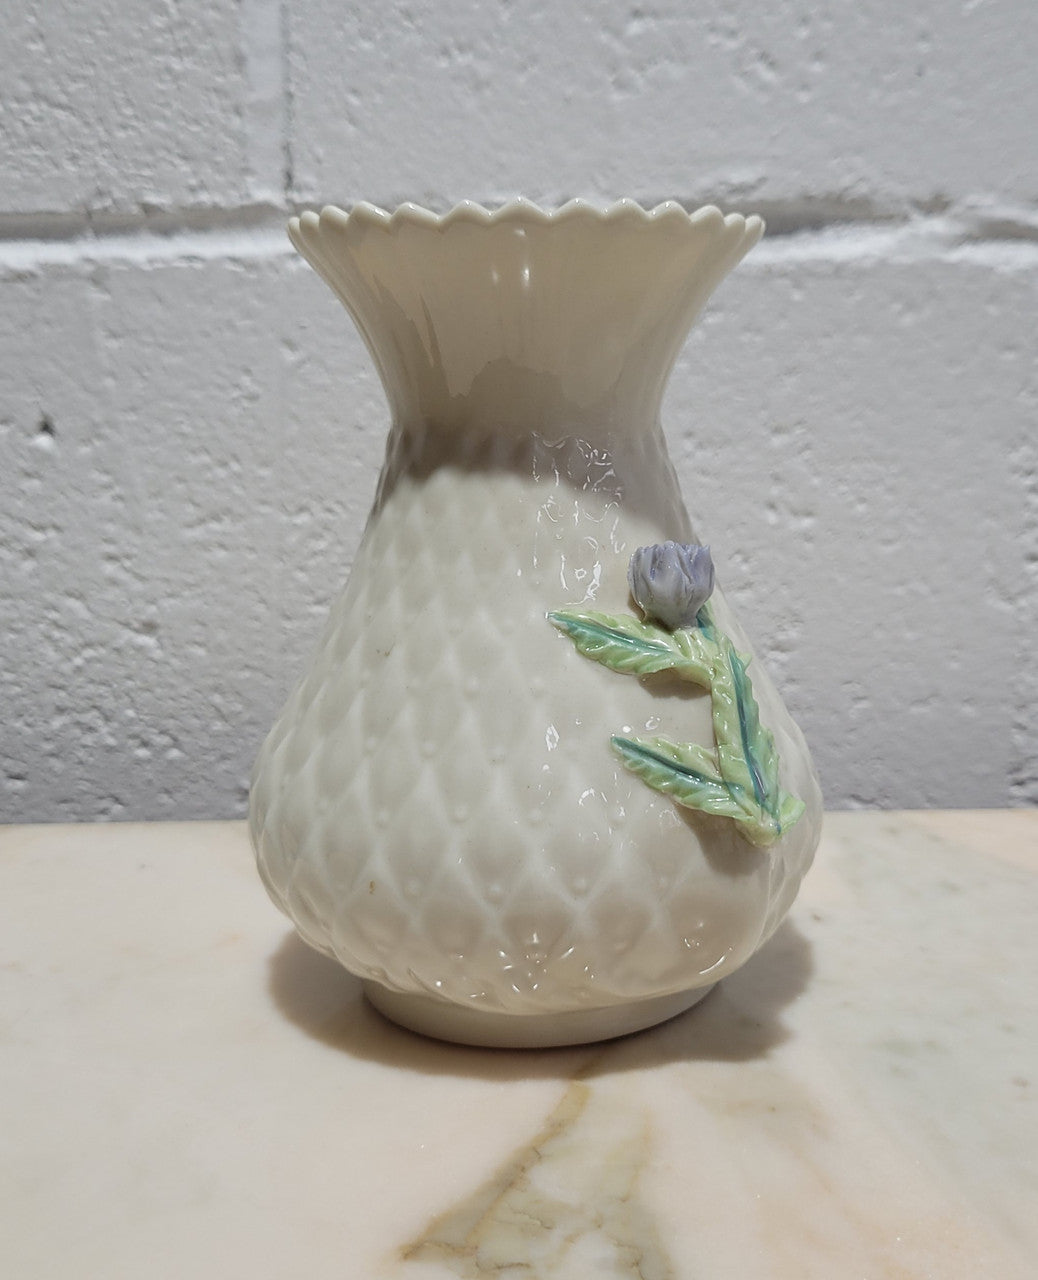 Vintage Belleek Irish porcelain vase a beautiful, rare piece in the thistle design.  Belleek produces fine porcelain characterized by its slightly iridescent glaze. Brown Mark 1980 – 1993.